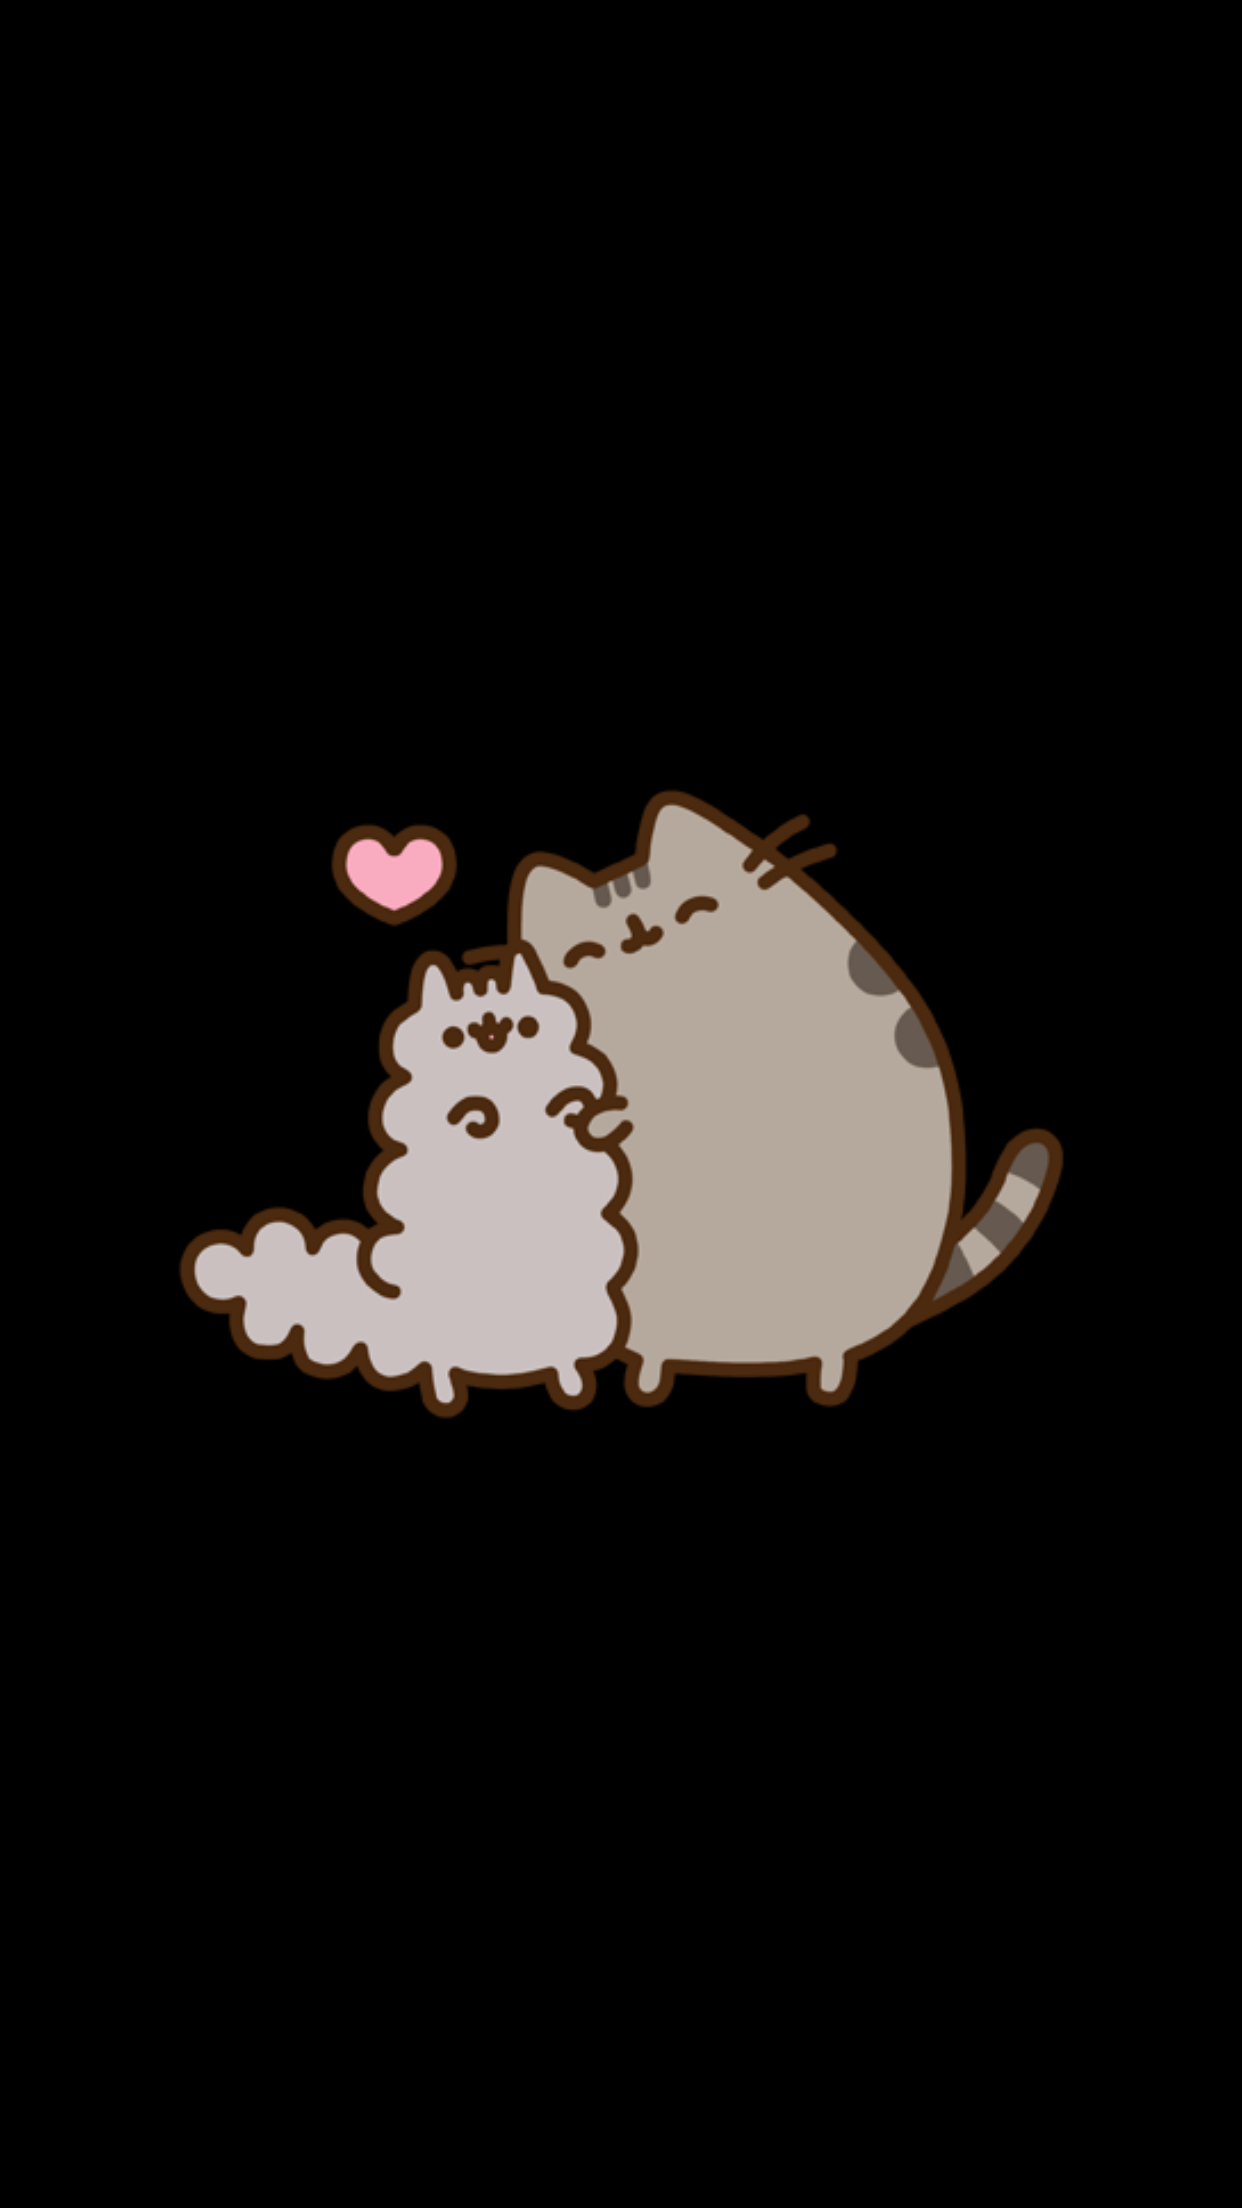 Pusheen and Stormy Tap the link for an awesome selection cat and kitten products for your feline companion!. Pusheen, Pusheen cat, Pusheen love